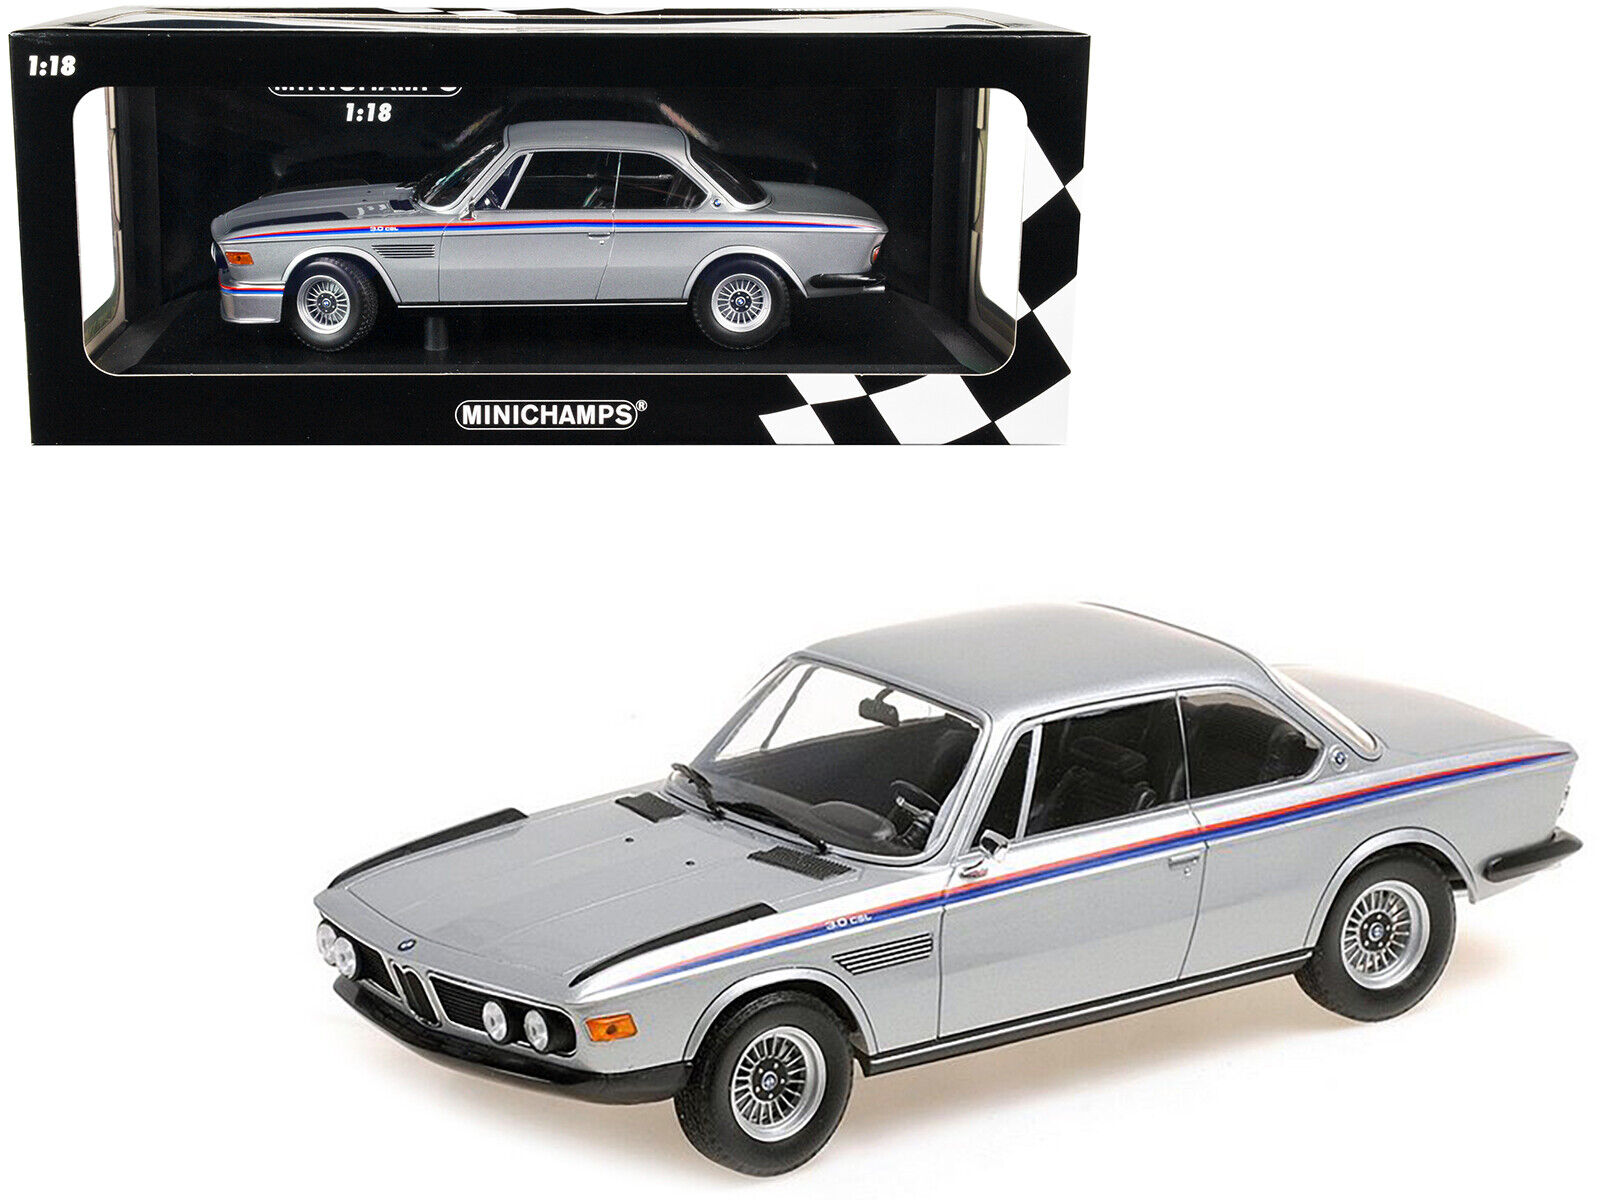 1973 BMW 3.0 CSL Silver Metallic with Red and Blue Stripes Limited Edition to